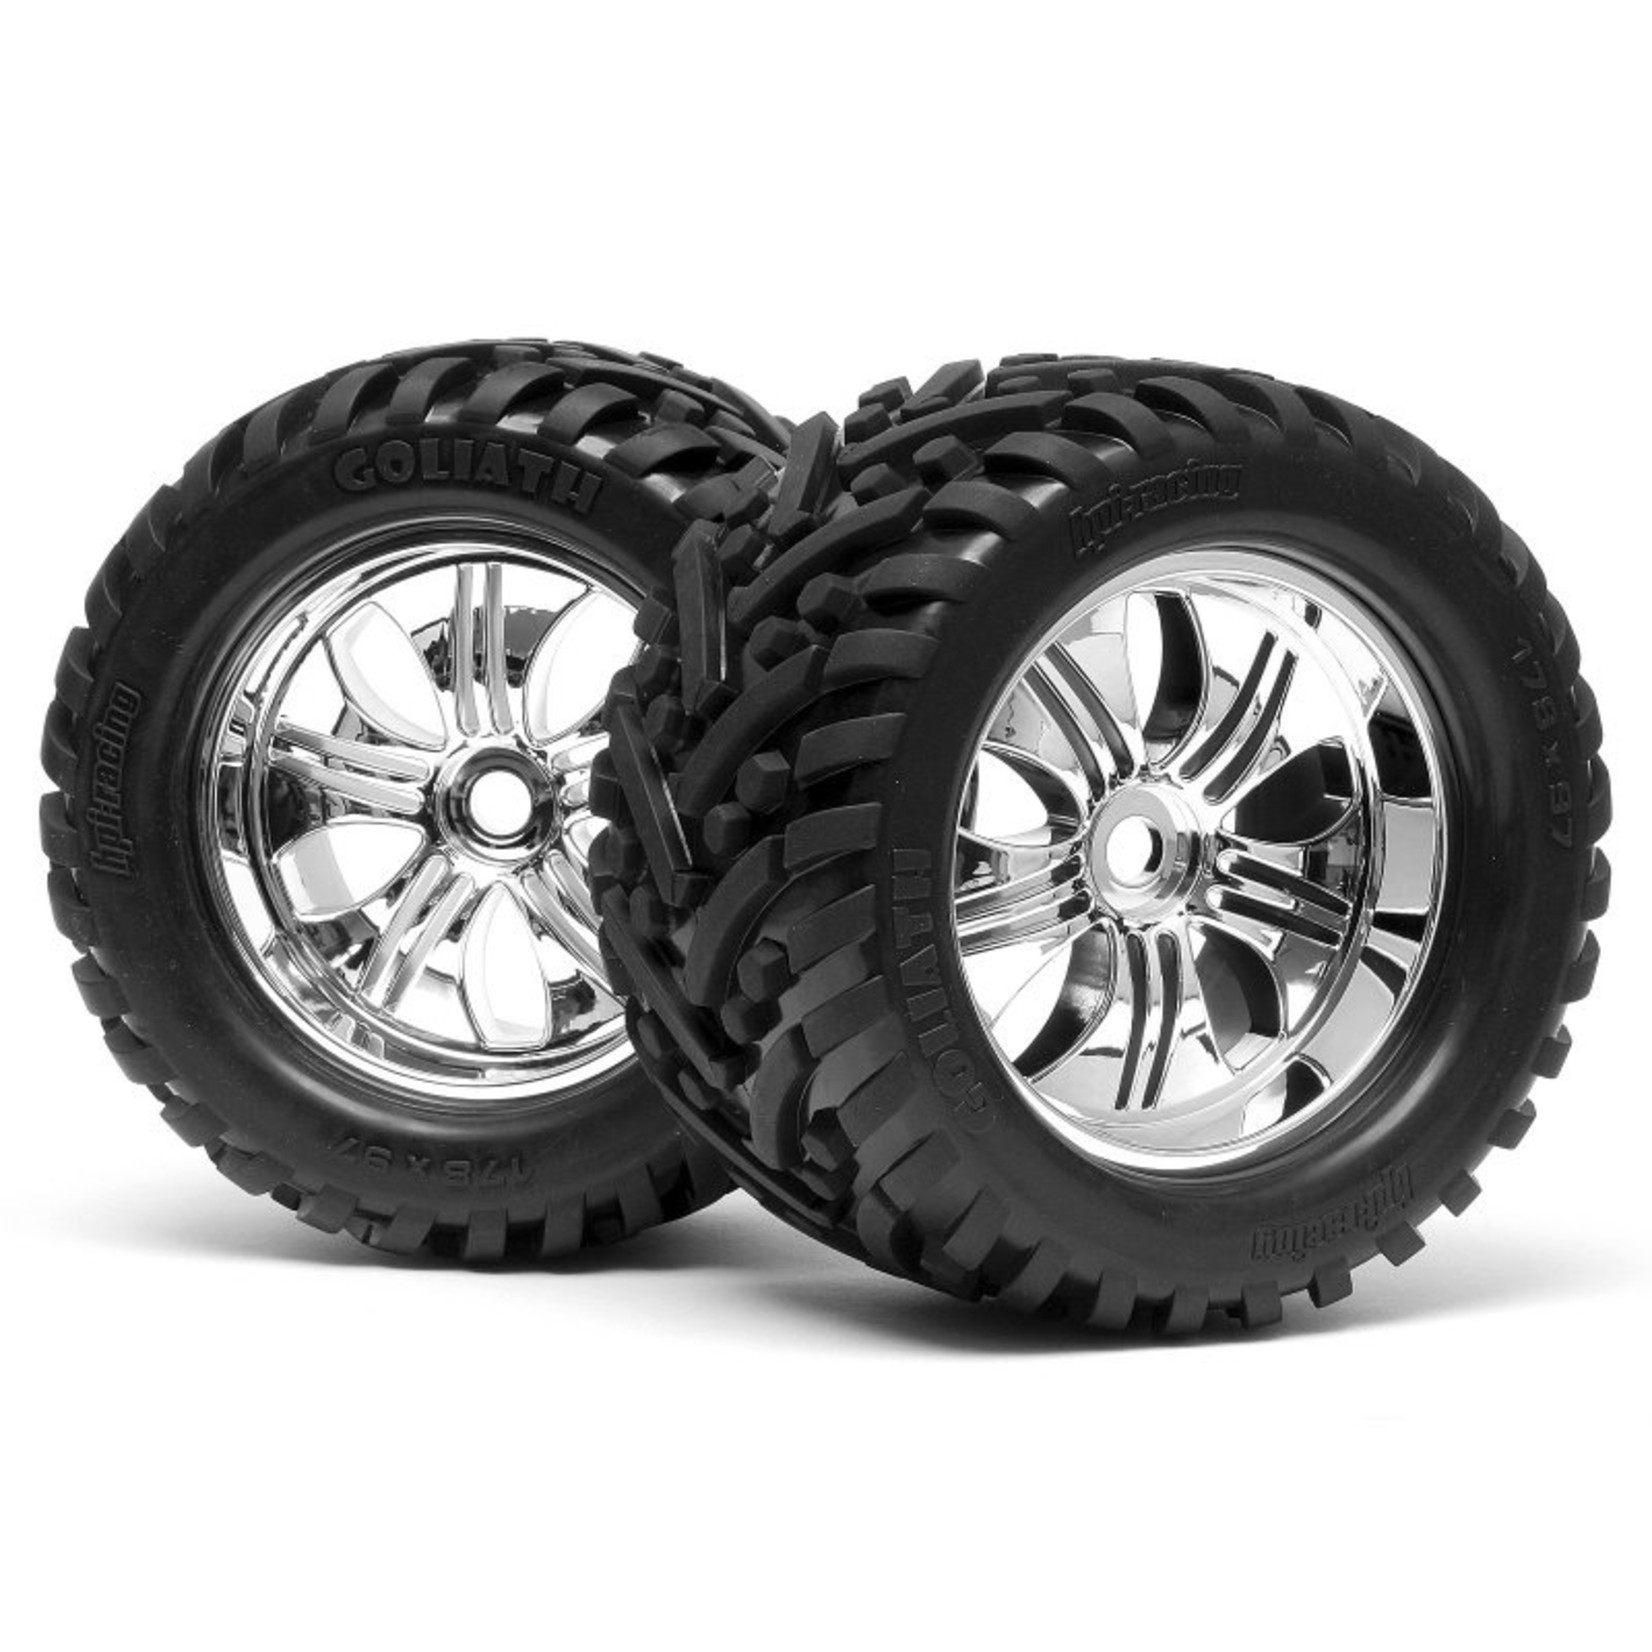 HPI Racing Mounted Goliath Tire 178X97mm On Tremor Wheel Chrome -